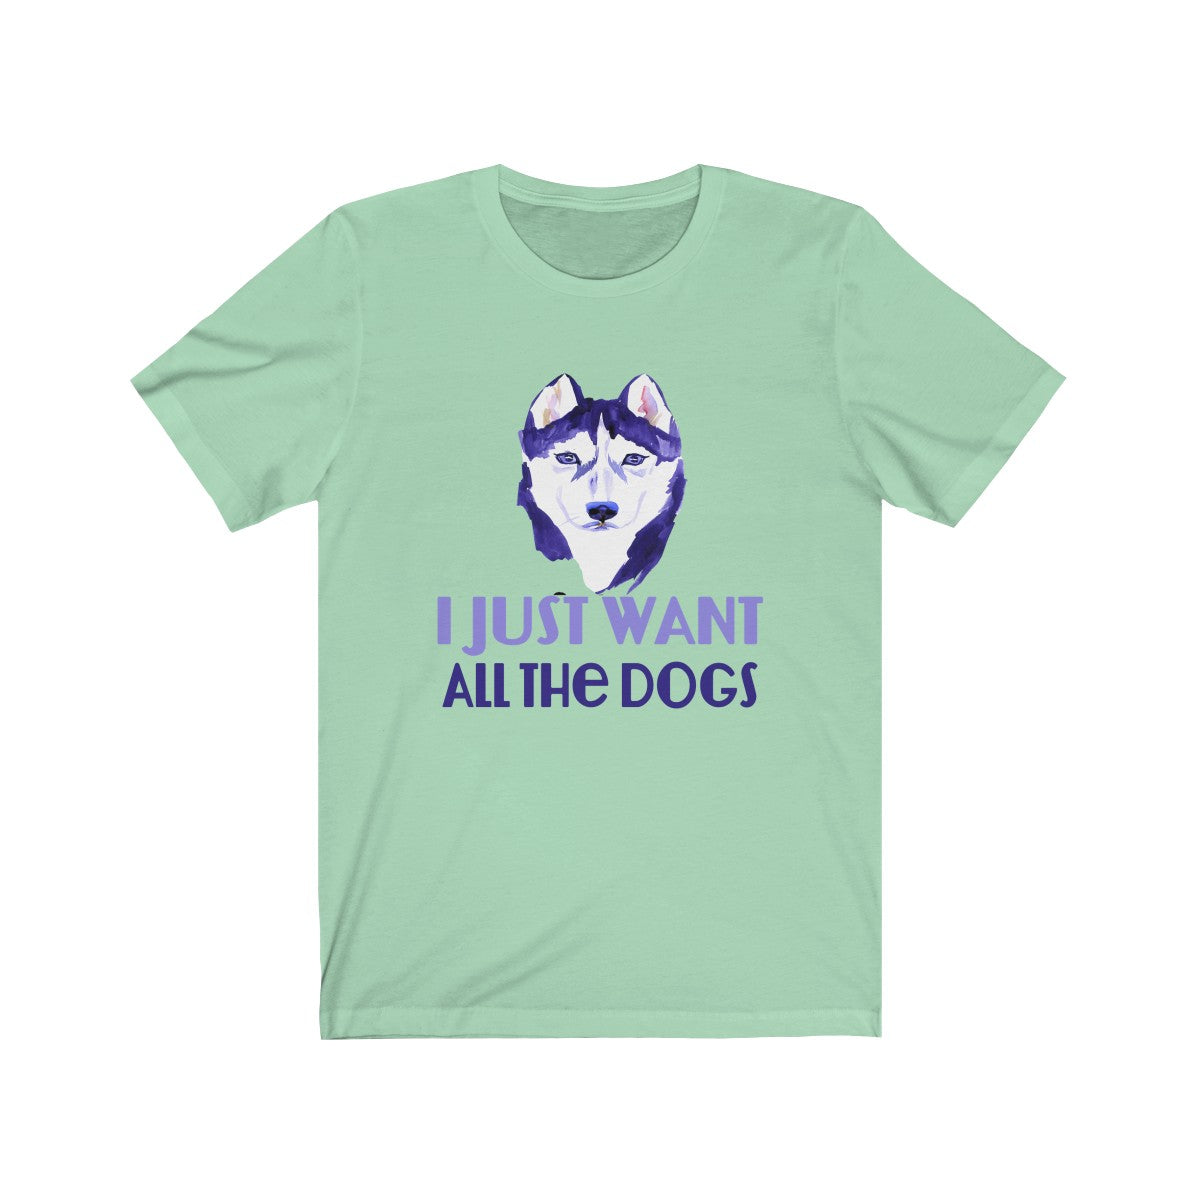 All the Dogs Unisex Adult Tee - Alpha Dawg Designs